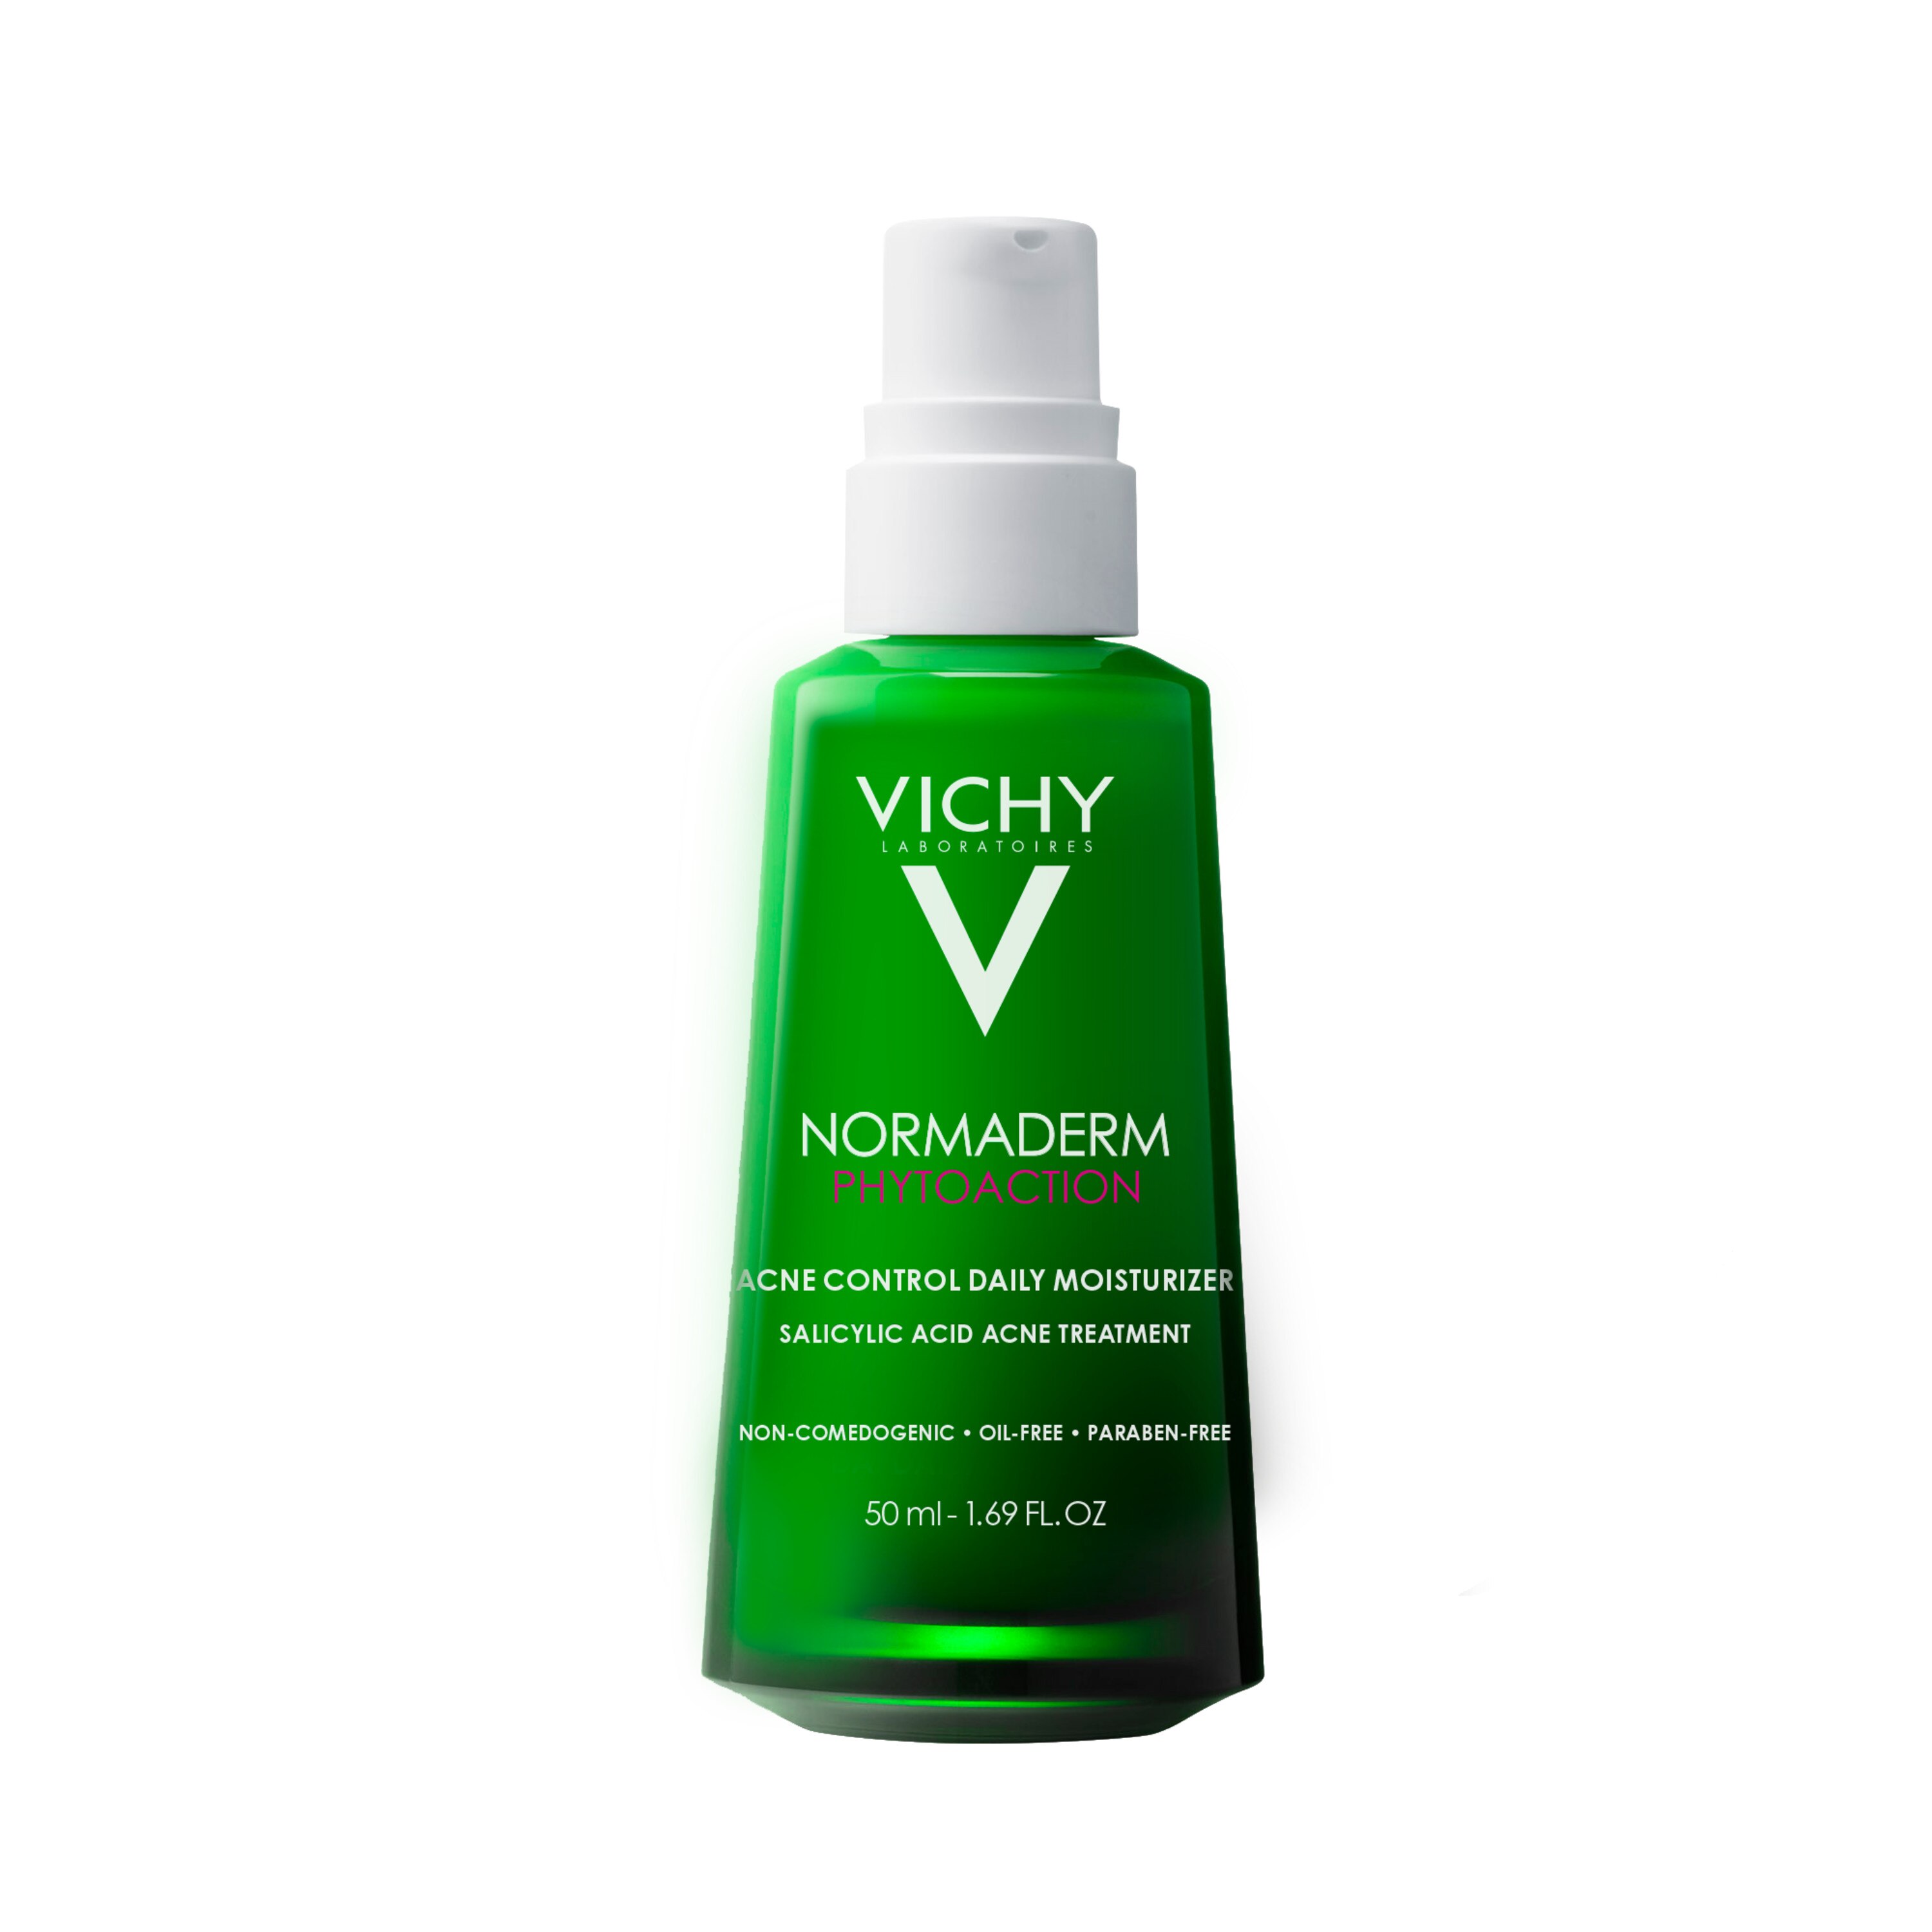 Vichy Normaderm PhytoAction Acne Control Daily Moisturizer, 1.69 OZ